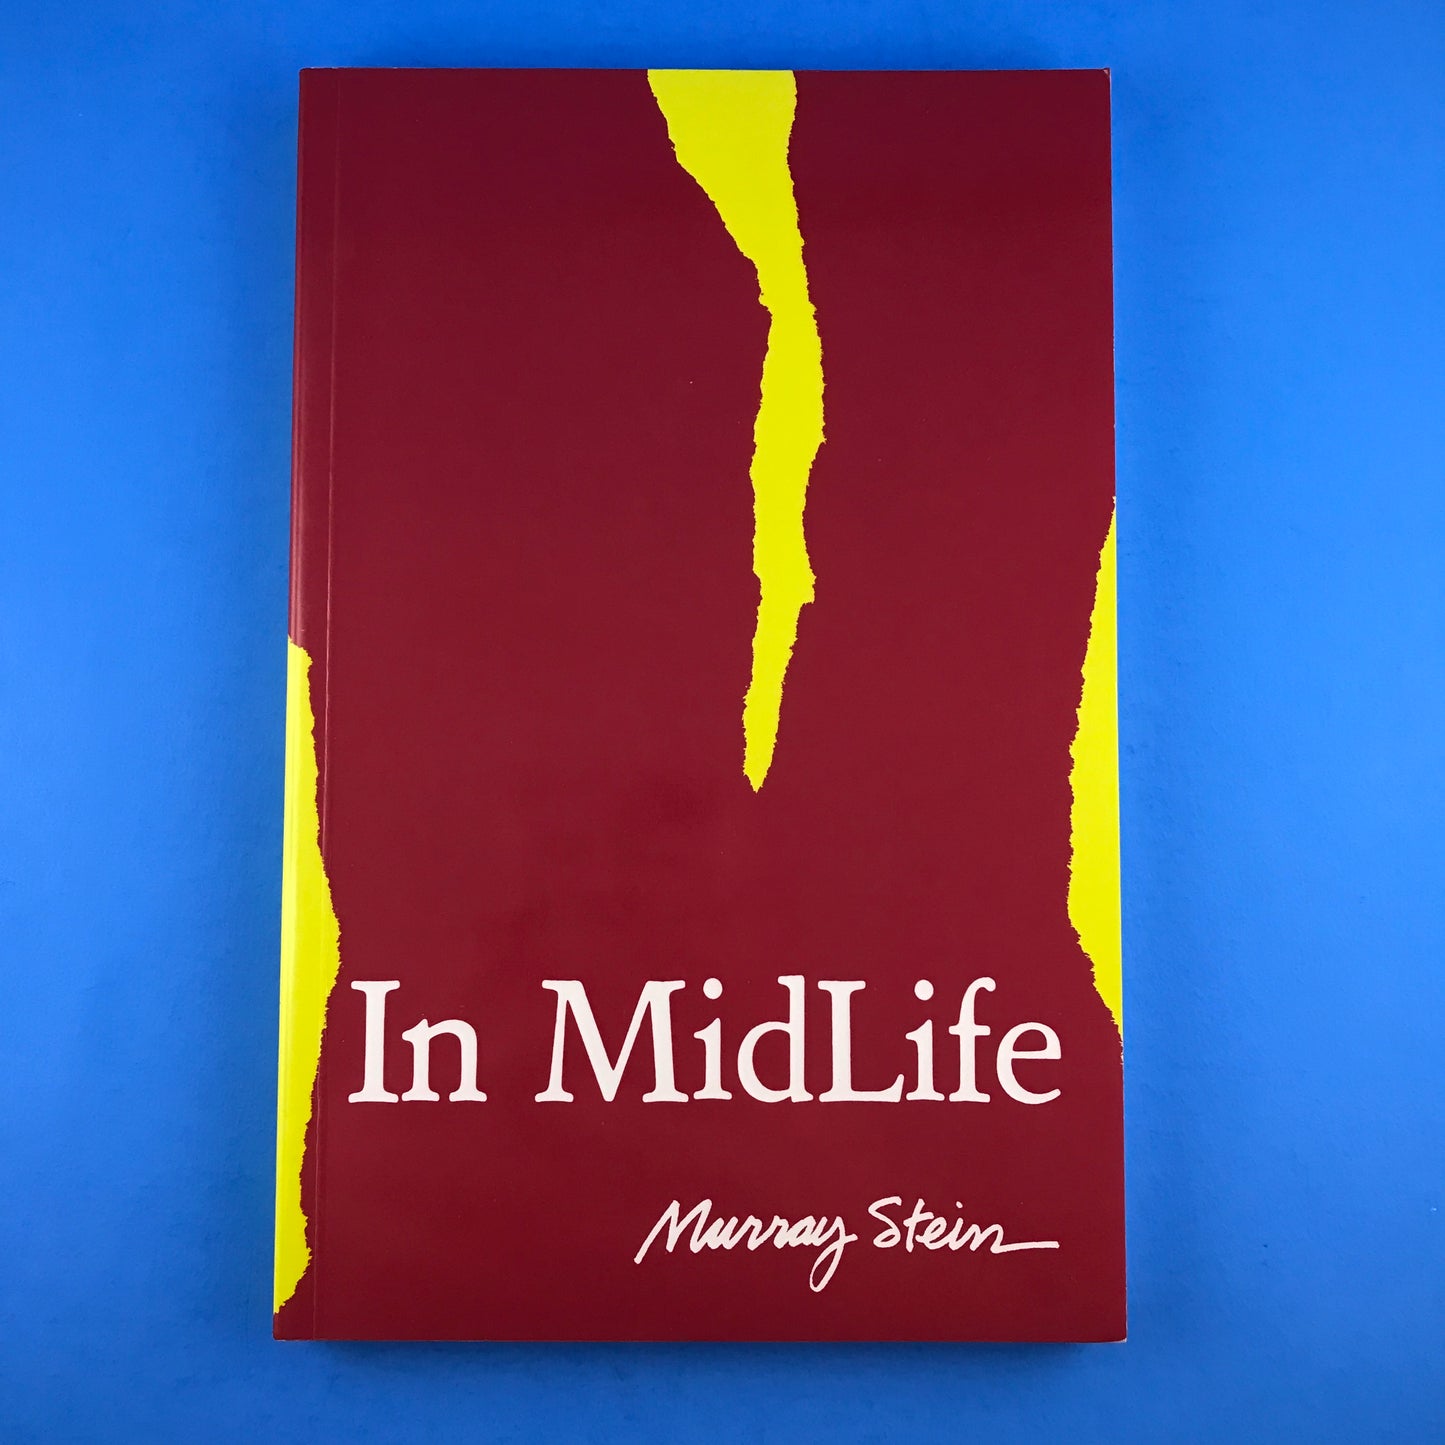 In MidLife: A Jungian Perspective